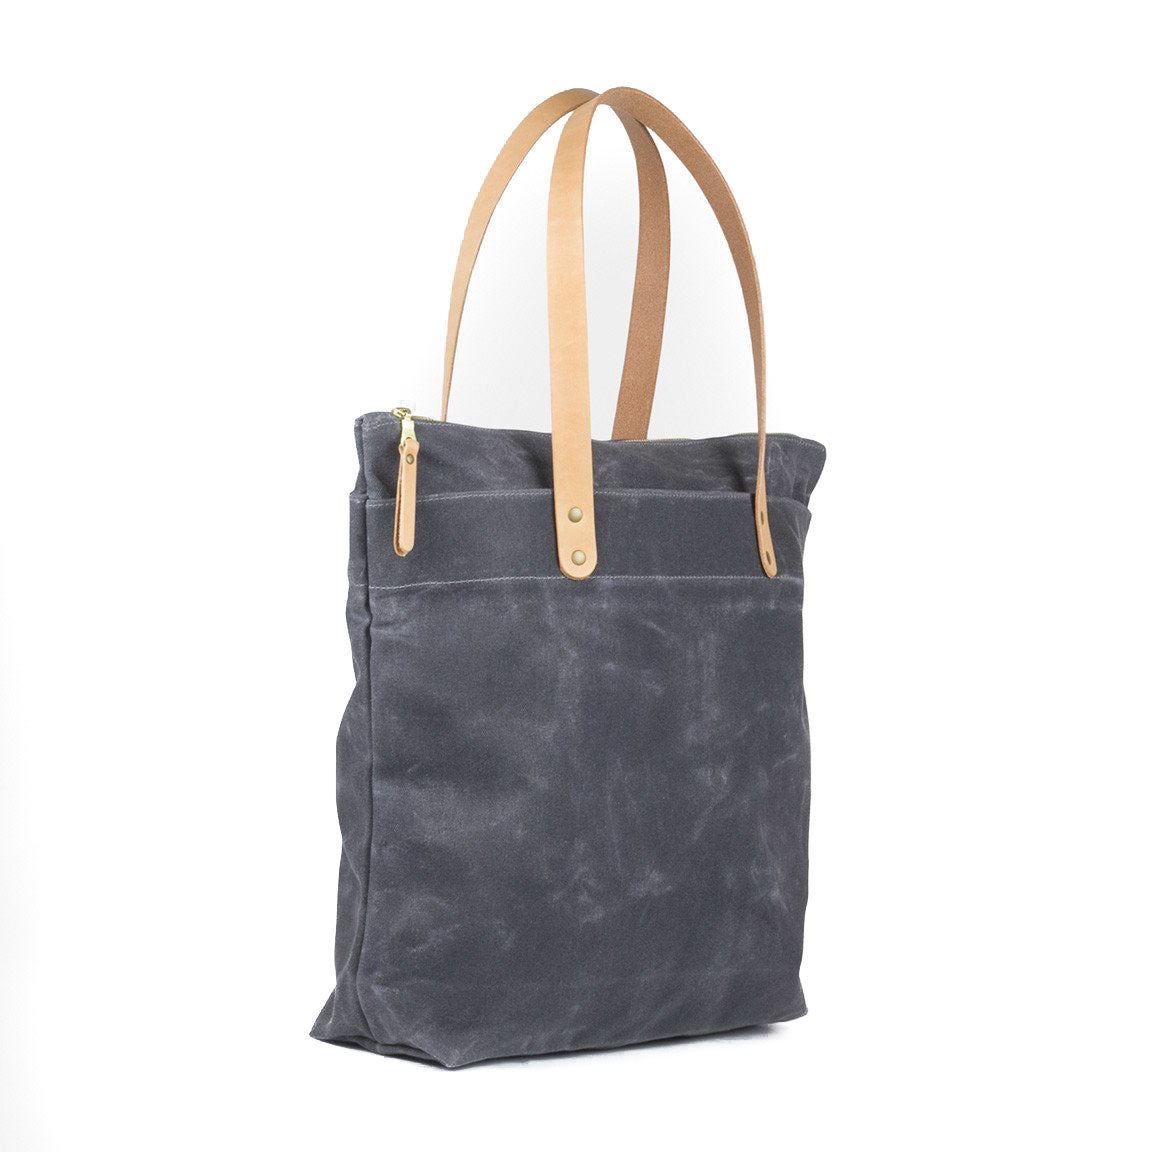 Zipper Tote Grey Waxed Canvas & Natural Leather